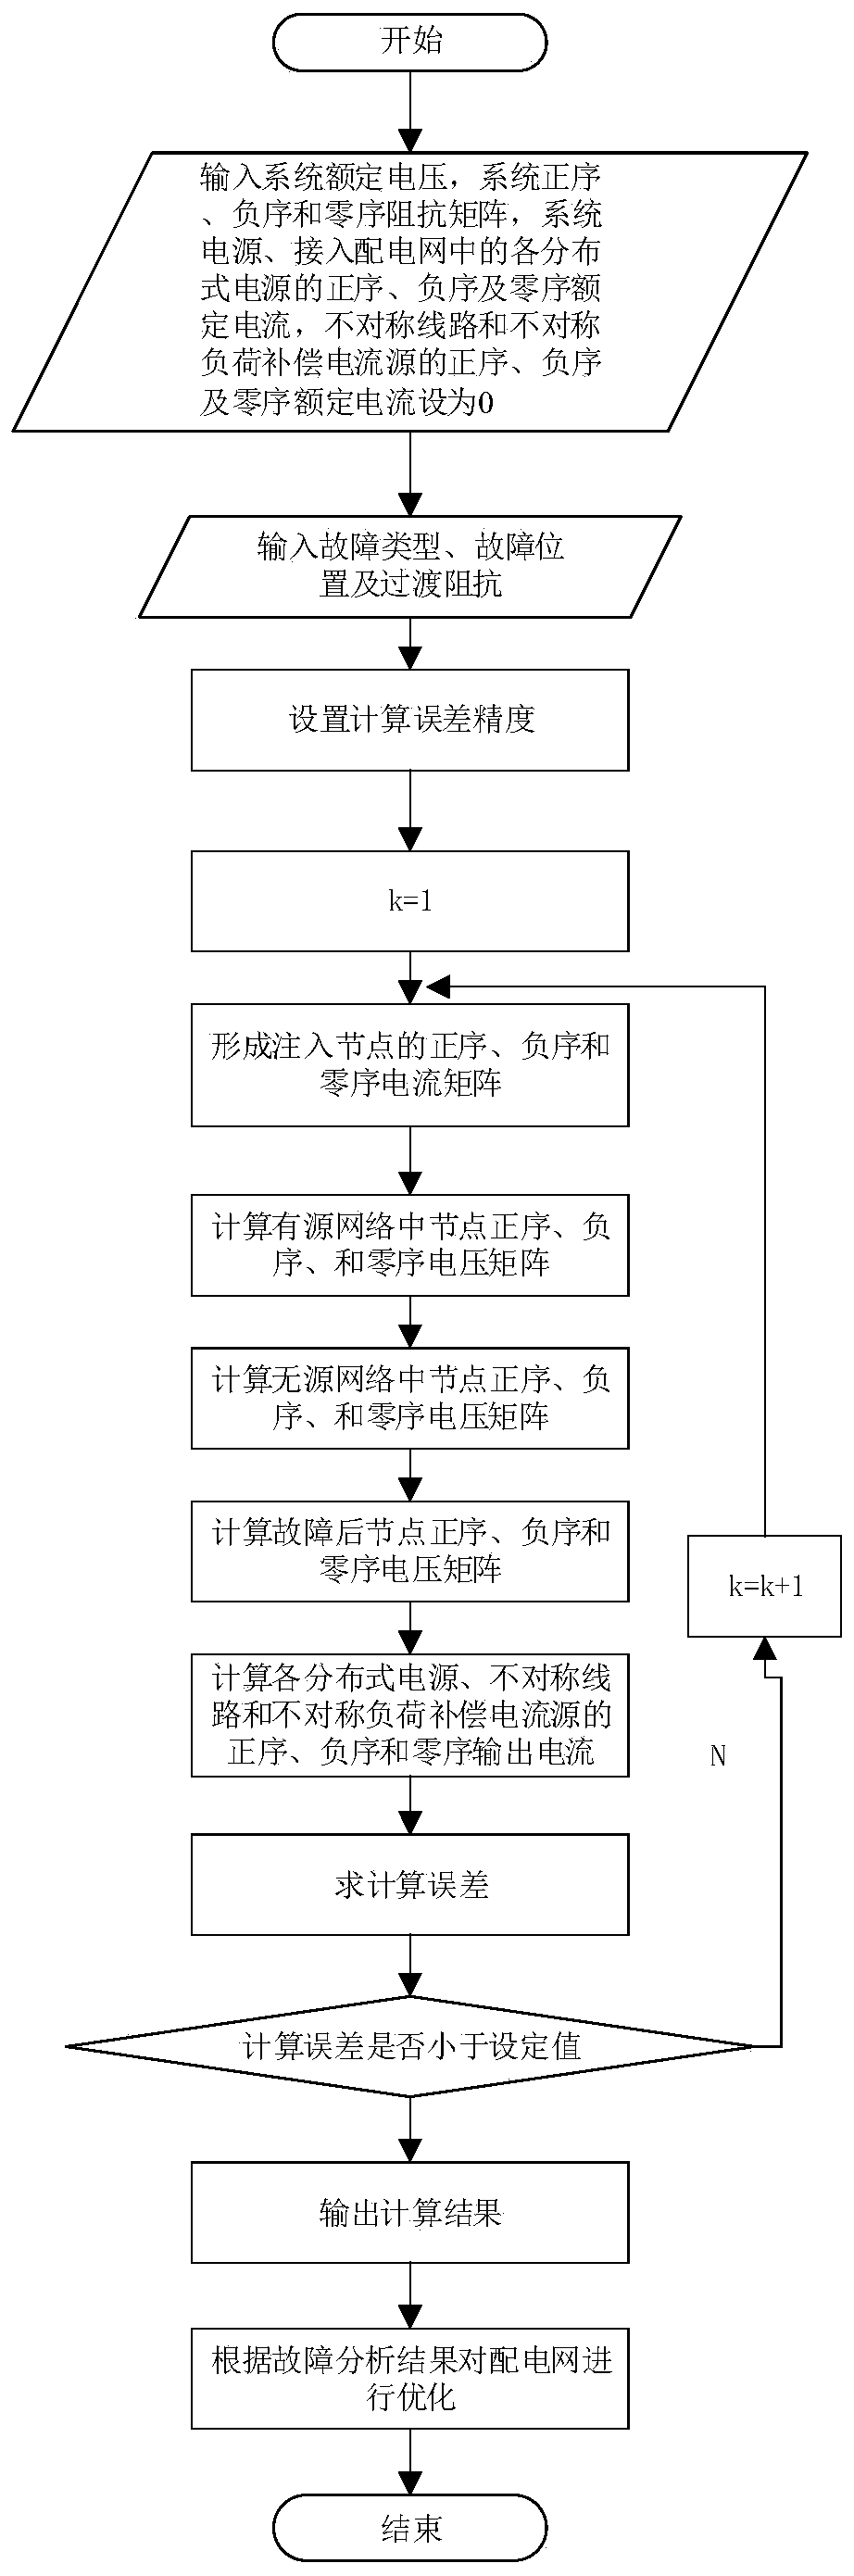 Fault processing method for unbalanced power distribution network containing inverter distributed power supply